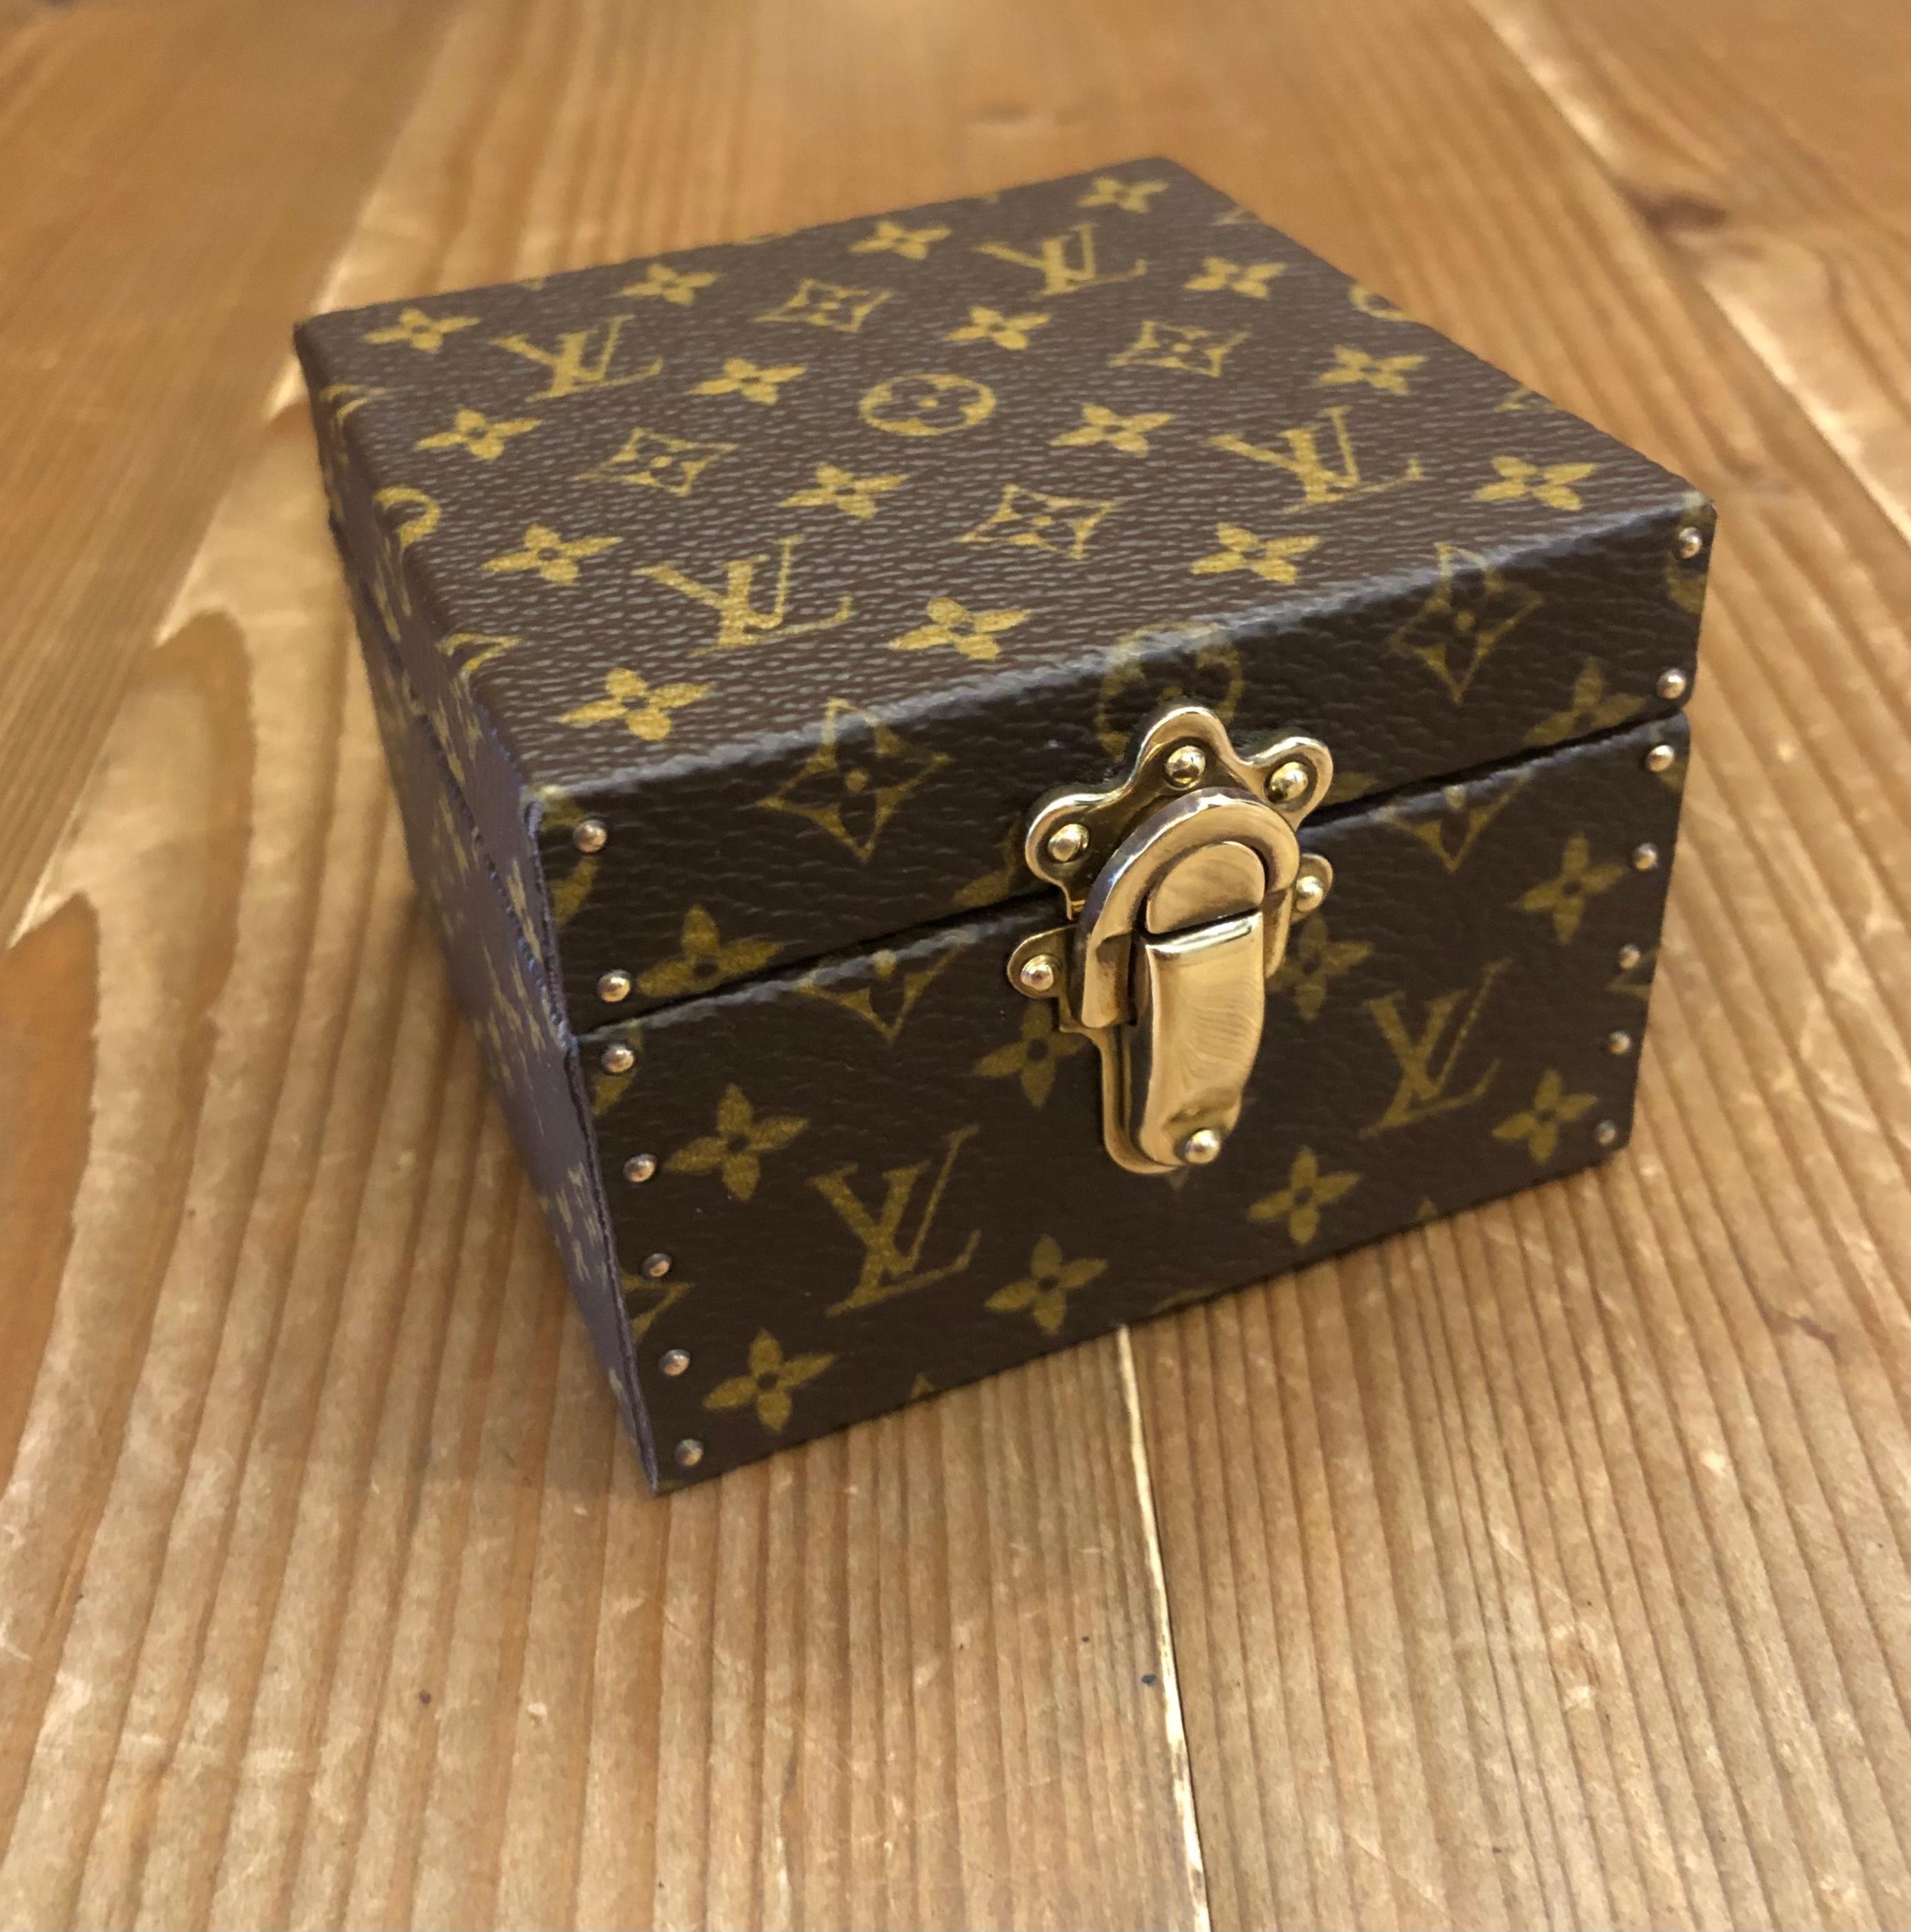 2004 LOUIS VUITTON mini trunk box in monogram canvas for small jewelry. Made in France with Date code AS 0074. Measures approximately 3 x 3 x 2.125 inches.

Condition: Minor signs of wear. Generally in very good condition

Exterior: Minor signs of